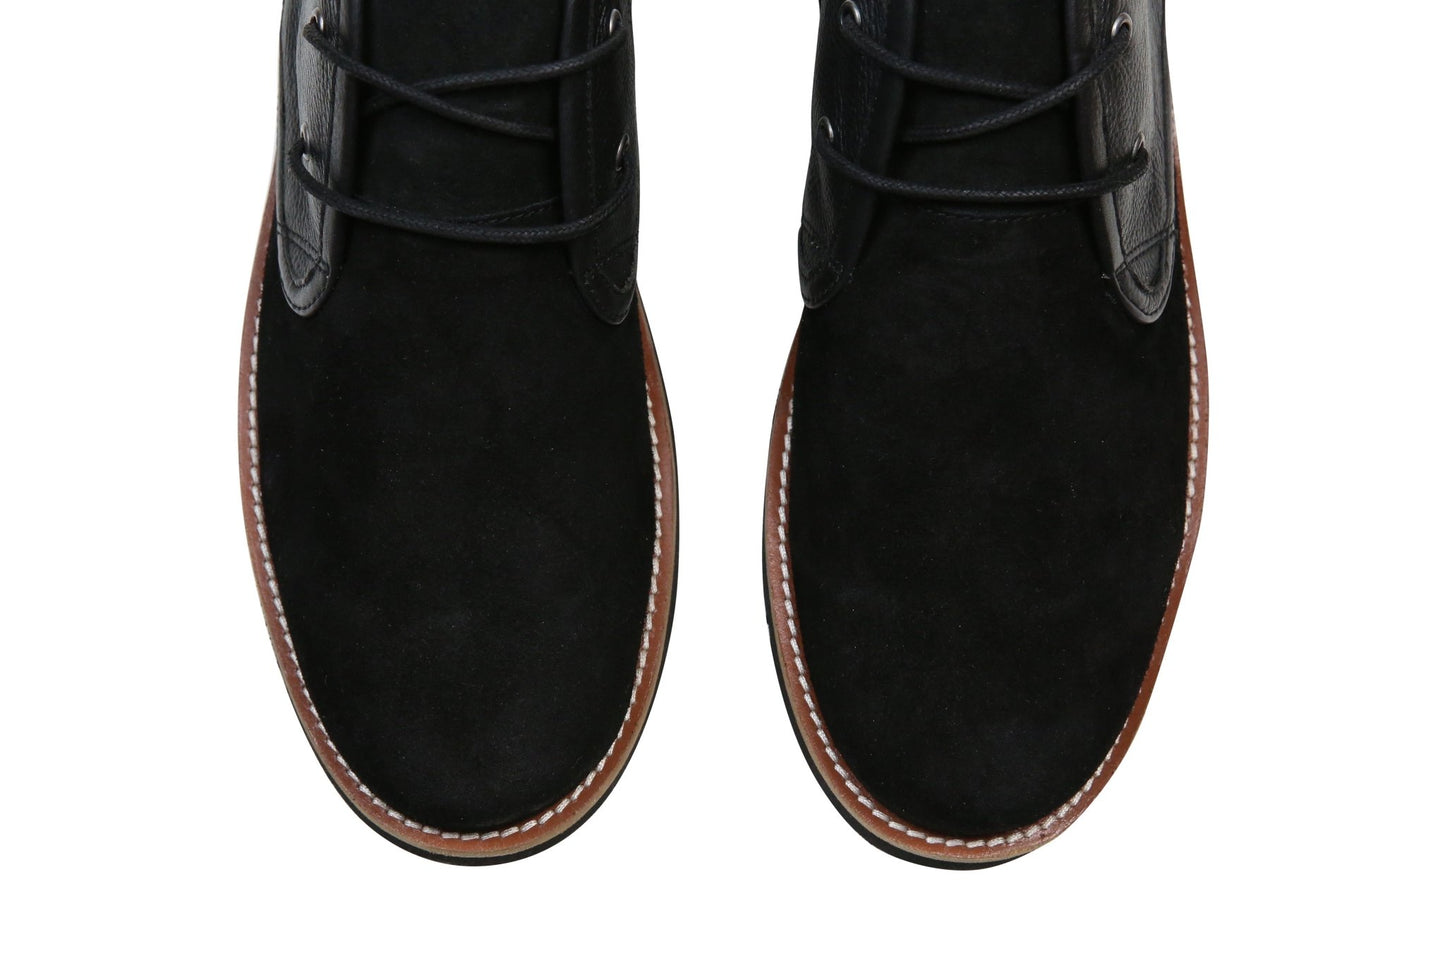 Hound & Hammer The Nolan | Black Ankle Boots for Men - Men - Footwear - Boots - Ankle Boots - Benn~Burry